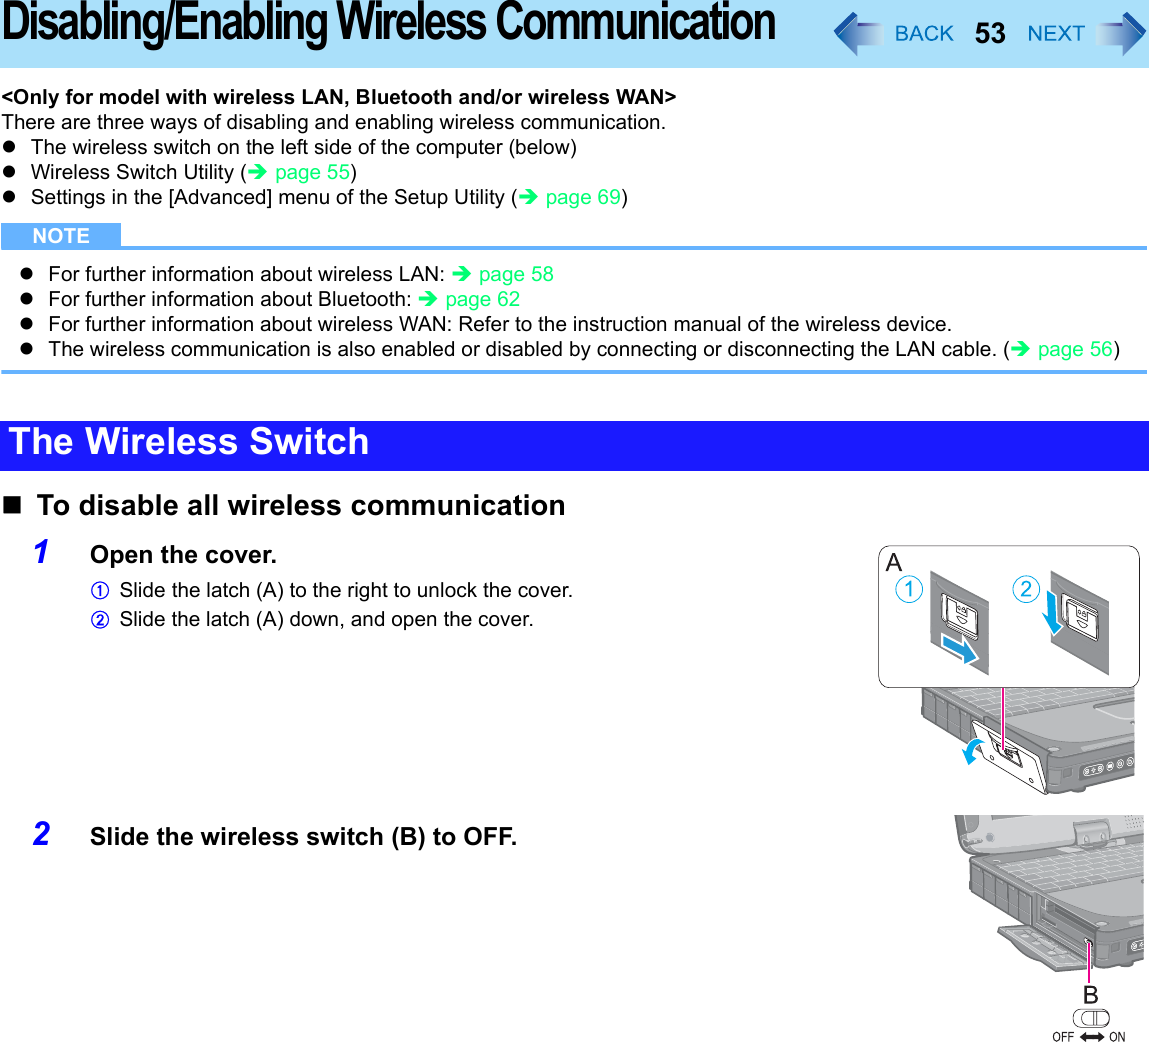 53Disabling/Enabling Wireless Communication&lt;Only for model with wireless LAN, Bluetooth and/or wireless WAN&gt;There are three ways of disabling and enabling wireless communication.zThe wireless switch on the left side of the computer (below)zWireless Switch Utility (Îpage 55)zSettings in the [Advanced] menu of the Setup Utility (Îpage 69)NOTEzFor further information about wireless LAN: Îpage 58zFor further information about Bluetooth: Îpage 62zFor further information about wireless WAN: Refer to the instruction manual of the wireless device.zThe wireless communication is also enabled or disabled by connecting or disconnecting the LAN cable. (Îpage 56)To disable all wireless communication1Open the cover.ASlide the latch (A) to the right to unlock the cover.BSlide the latch (A) down, and open the cover.2Slide the wireless switch (B) to OFF.The Wireless Switch